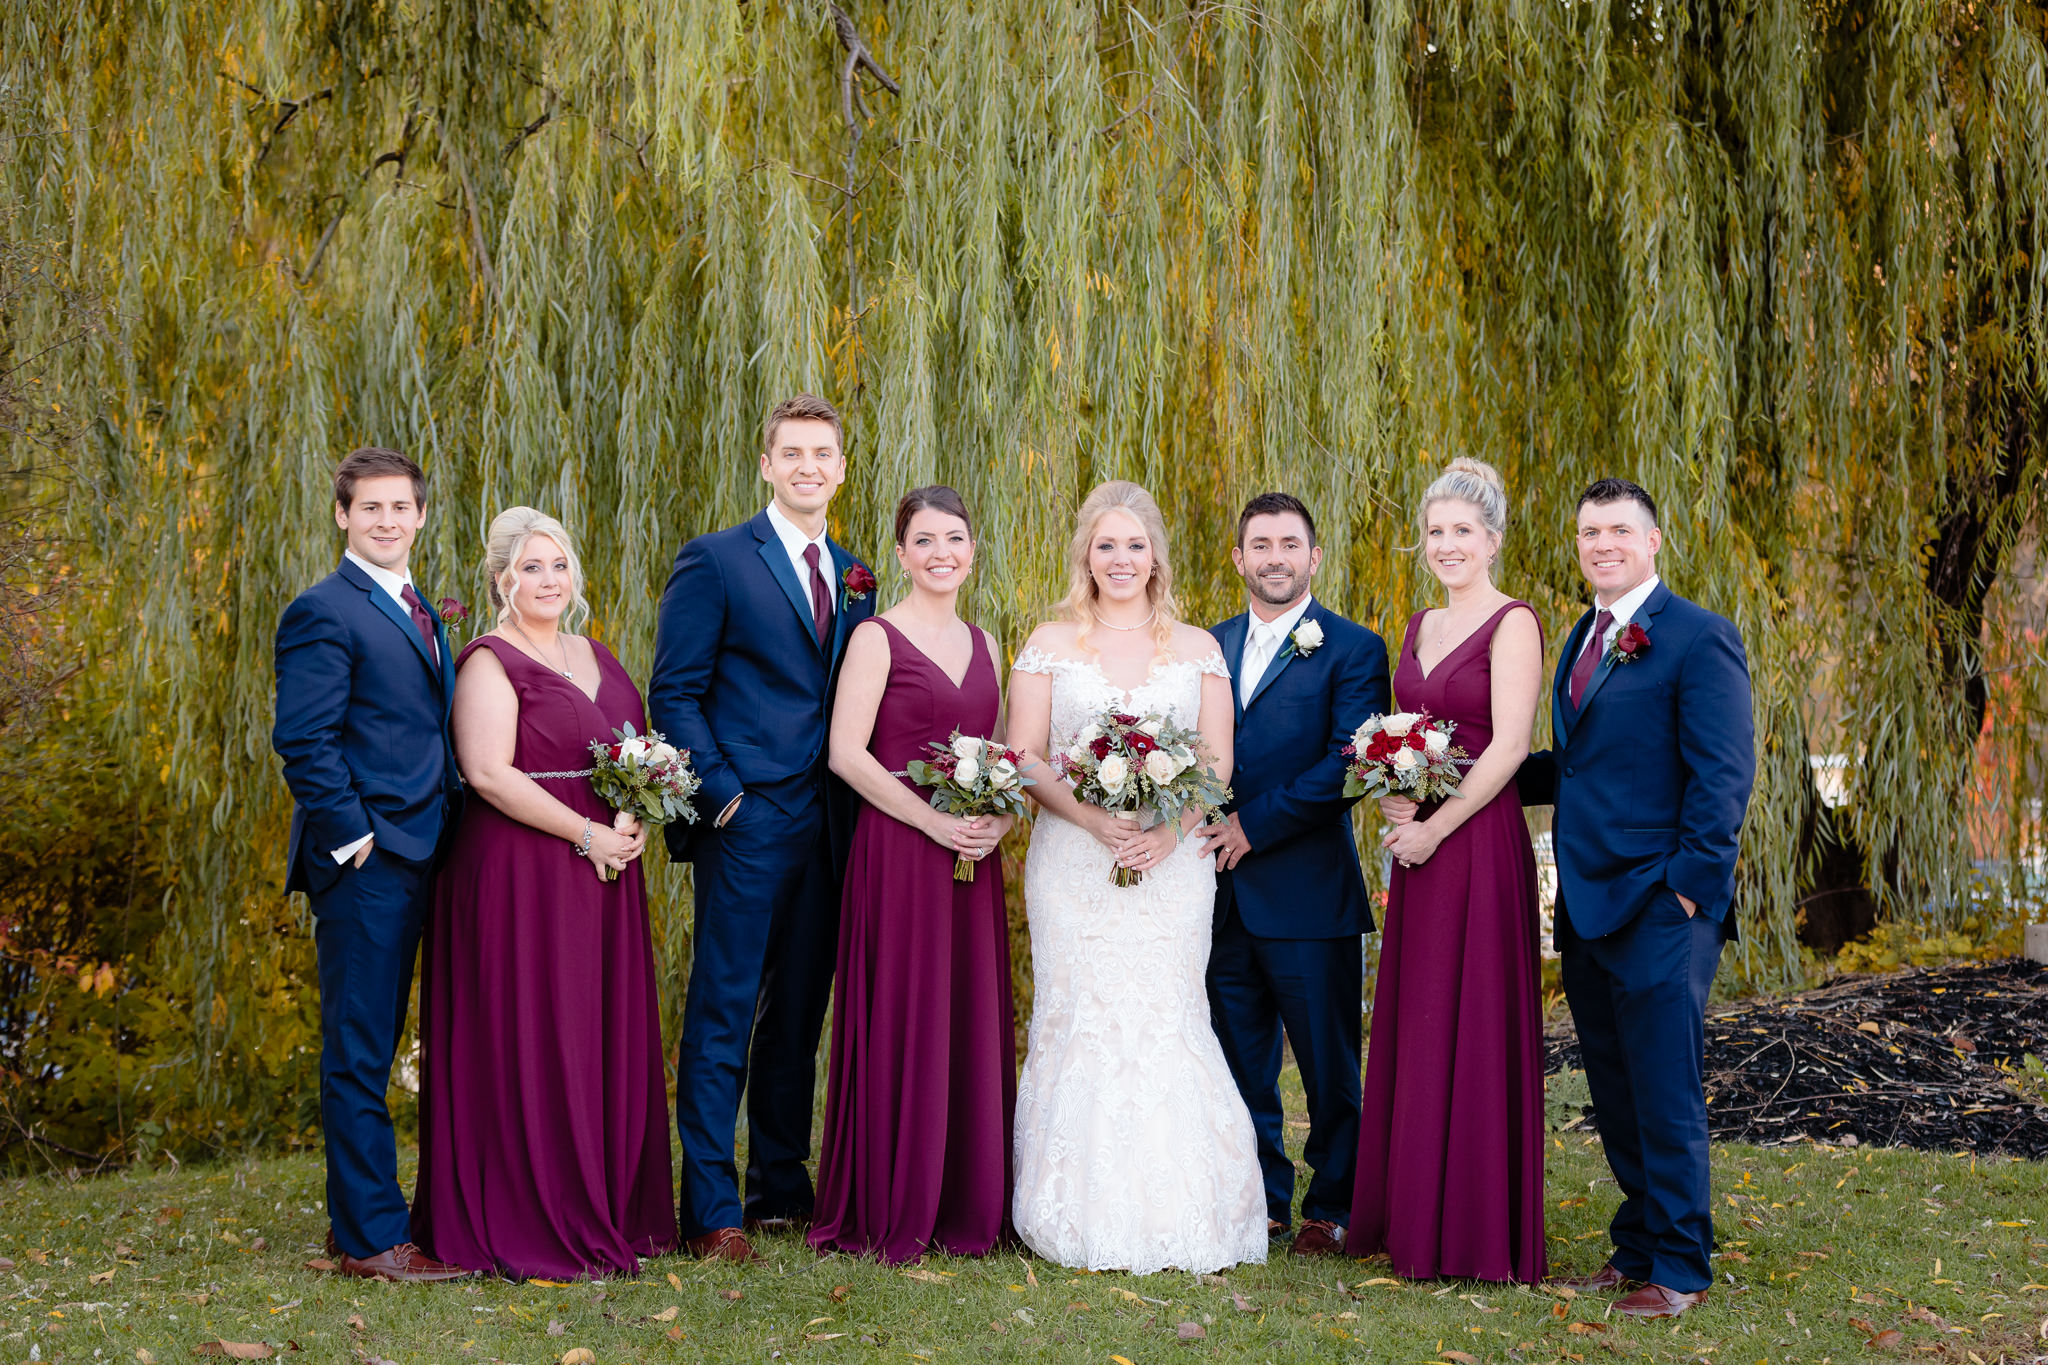 Bridal party under a willow tree at Riverside Landing in Oakmont